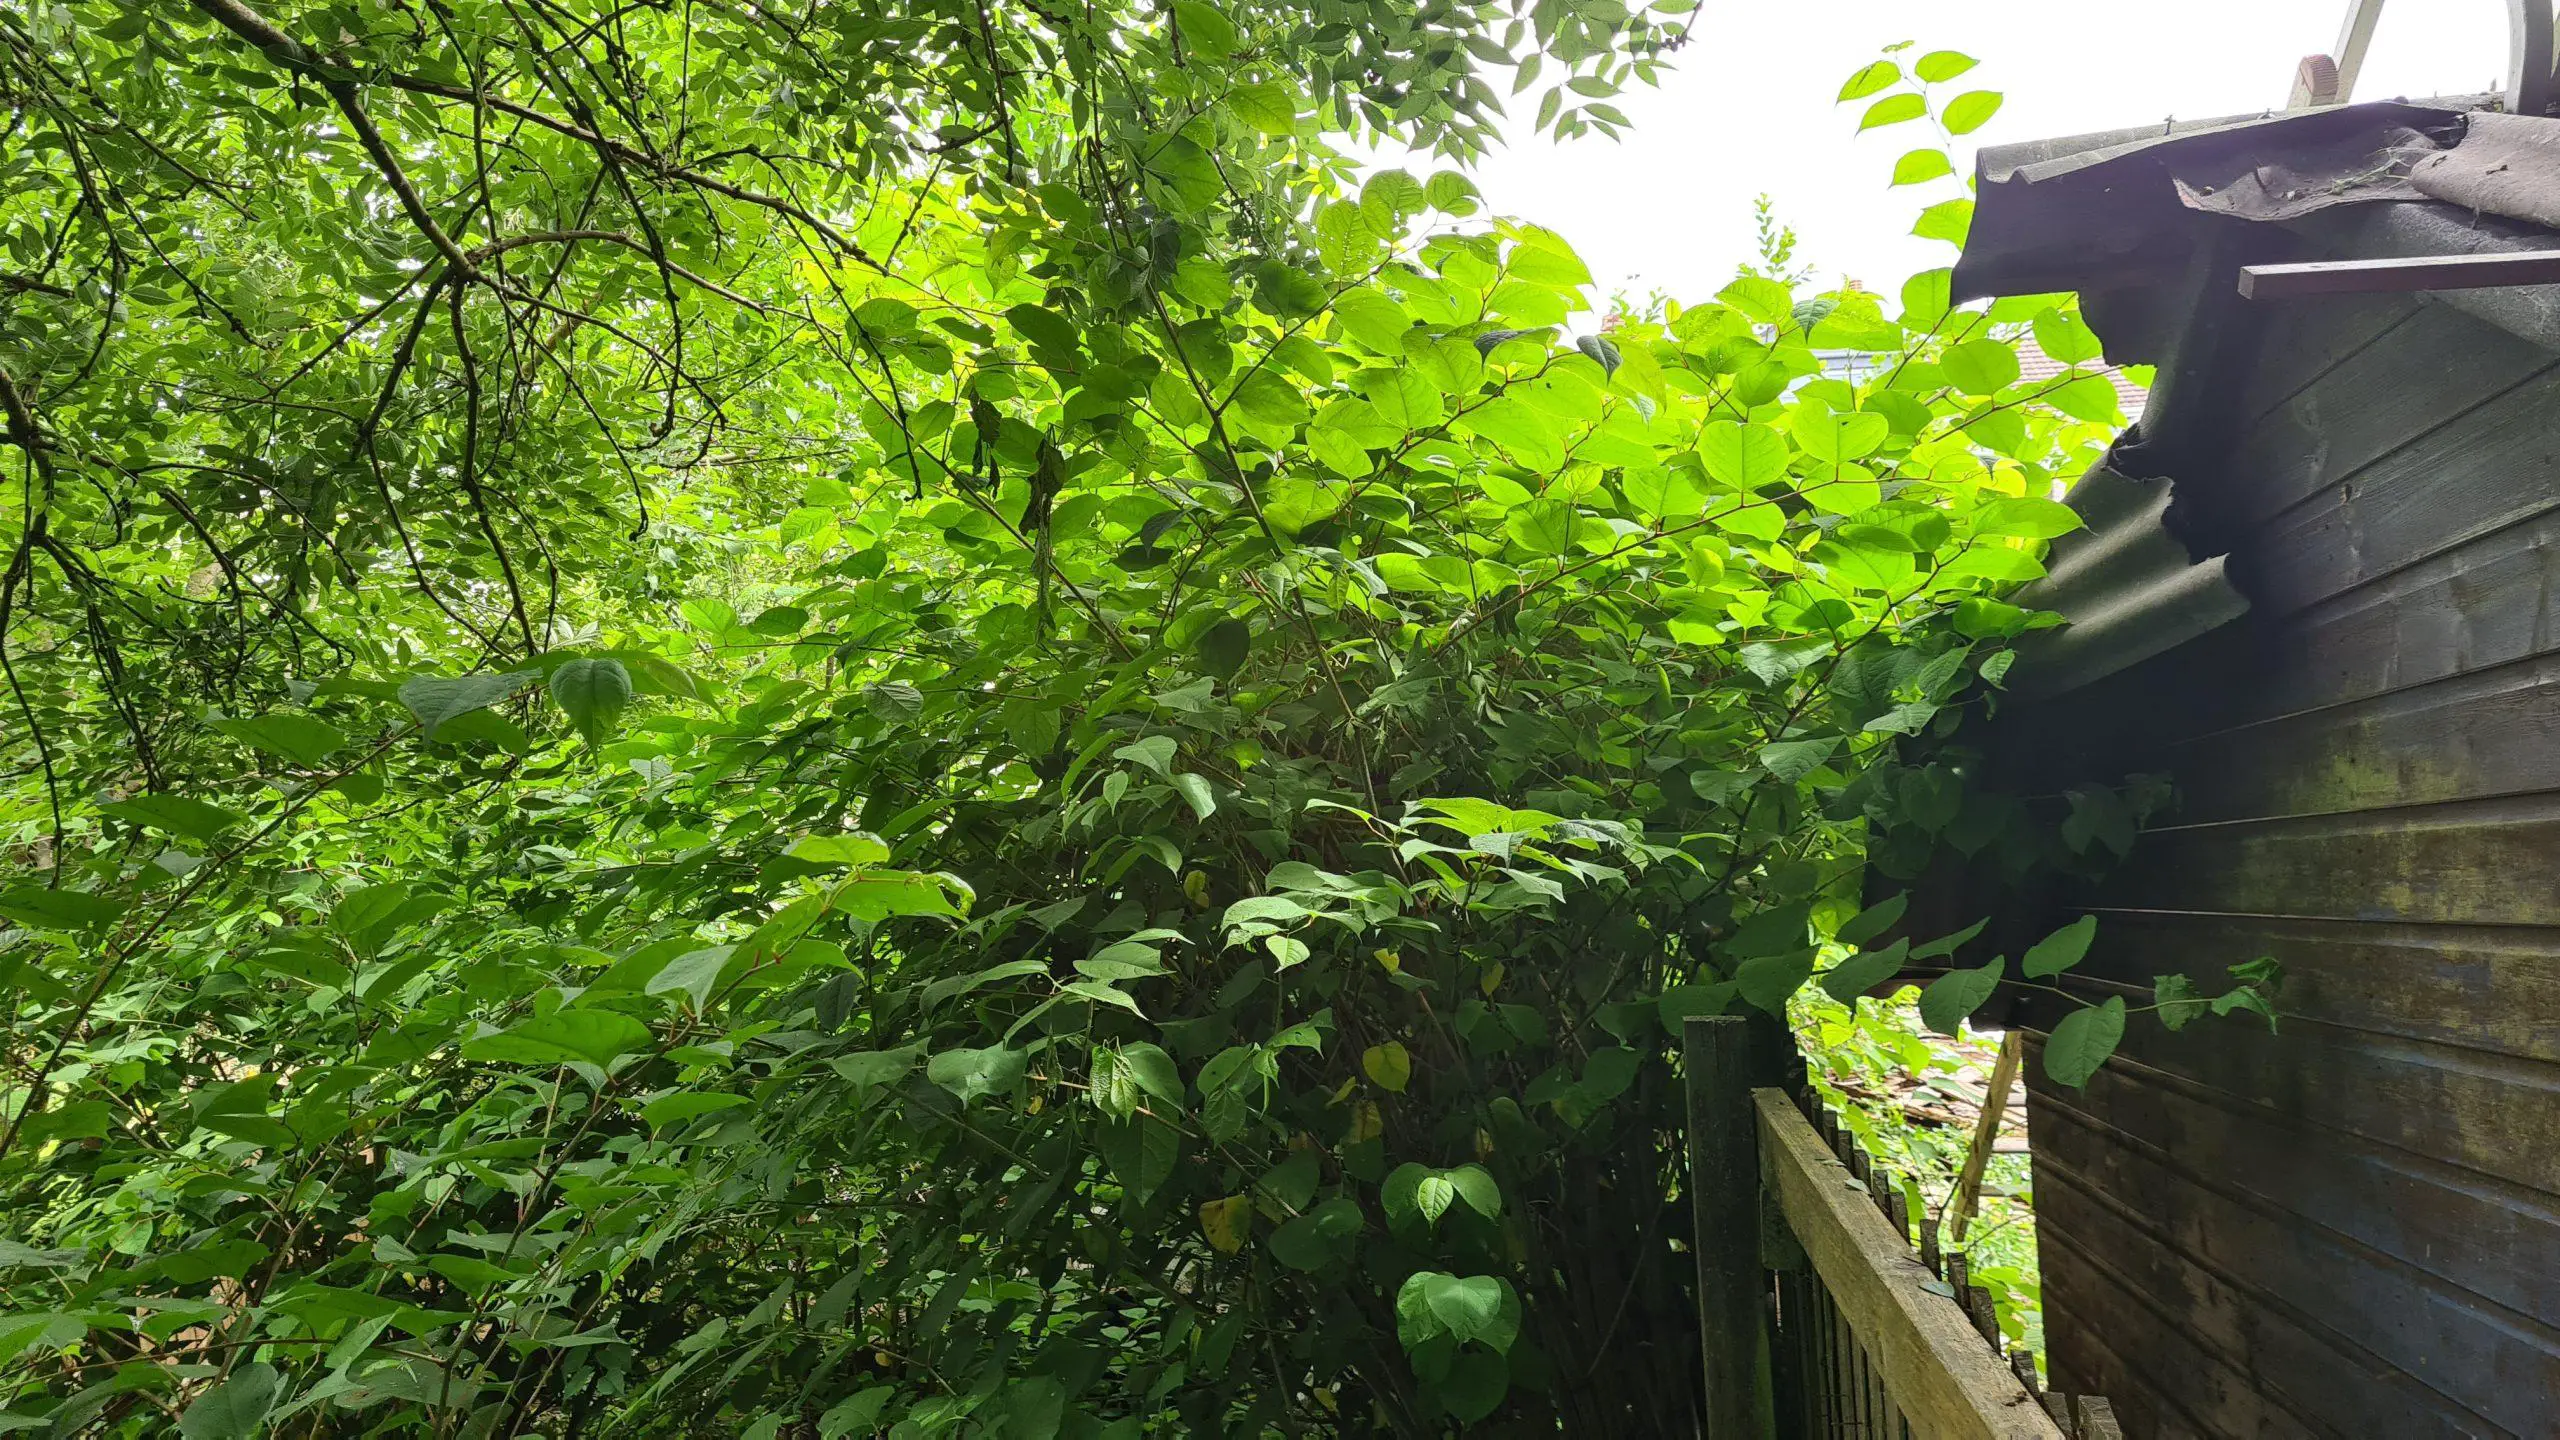 Japanese knotweed encroaches onto a neighbours property all too easily